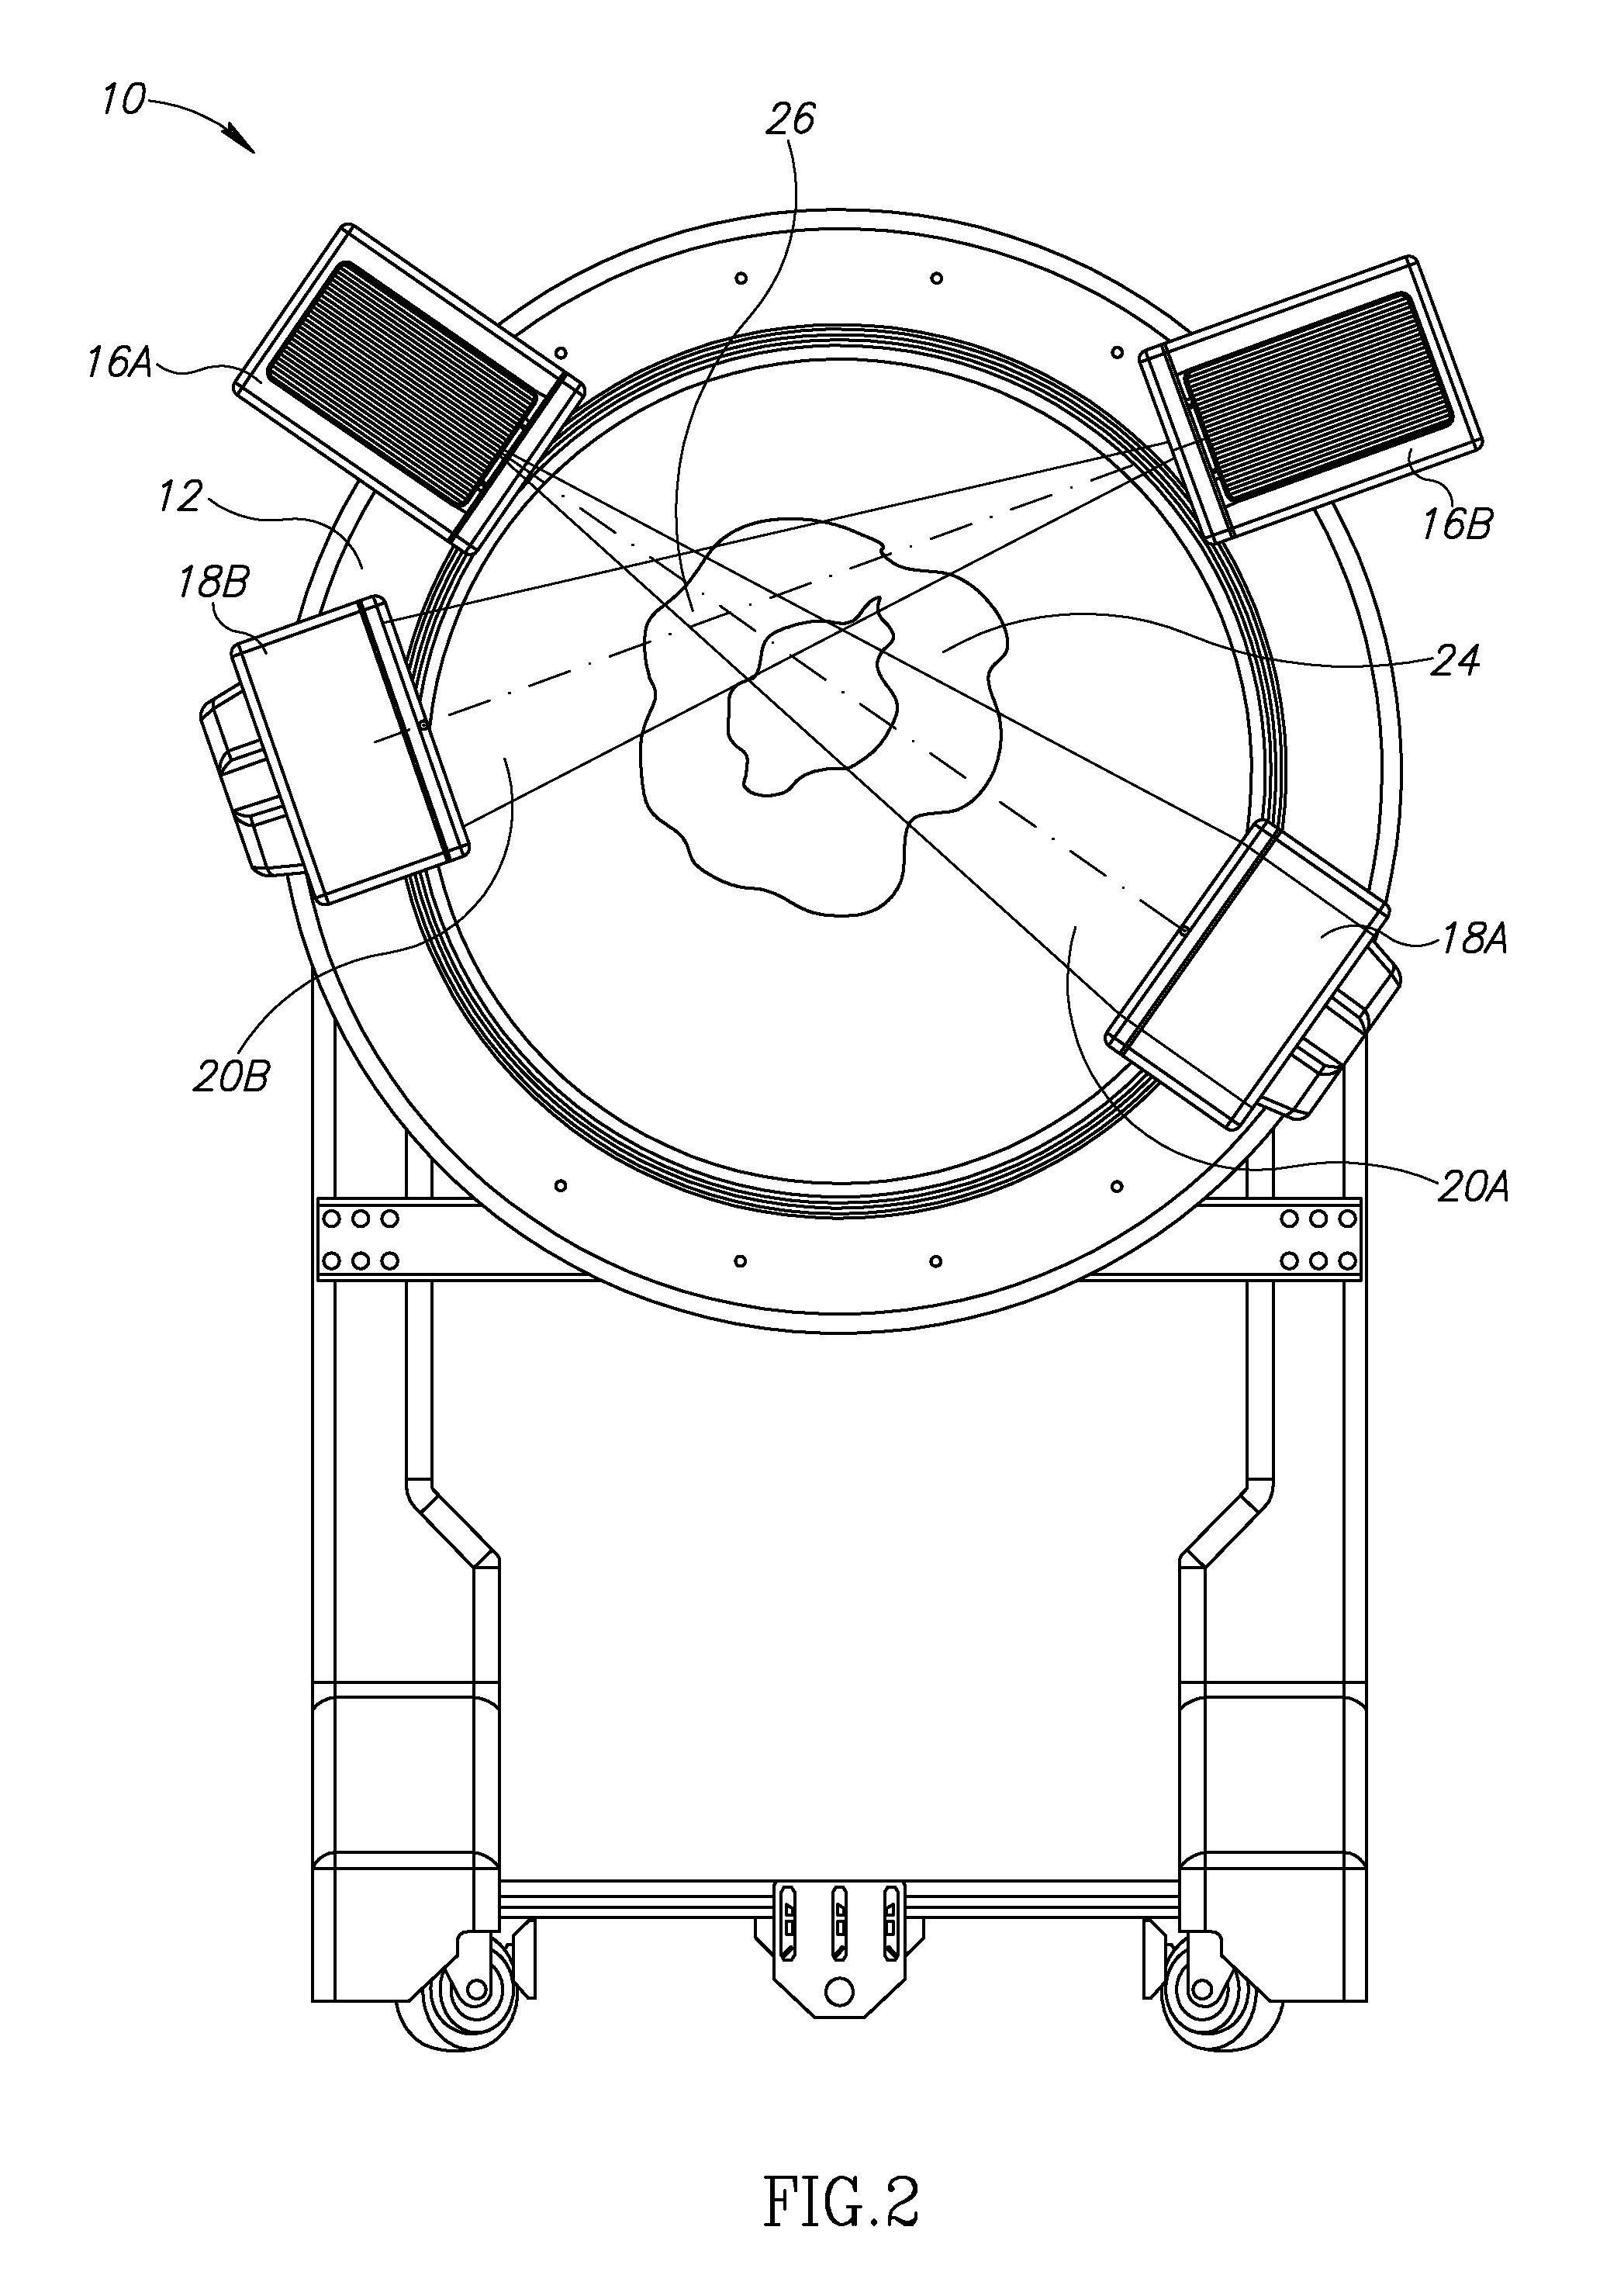 CT scanning system with interlapping beams